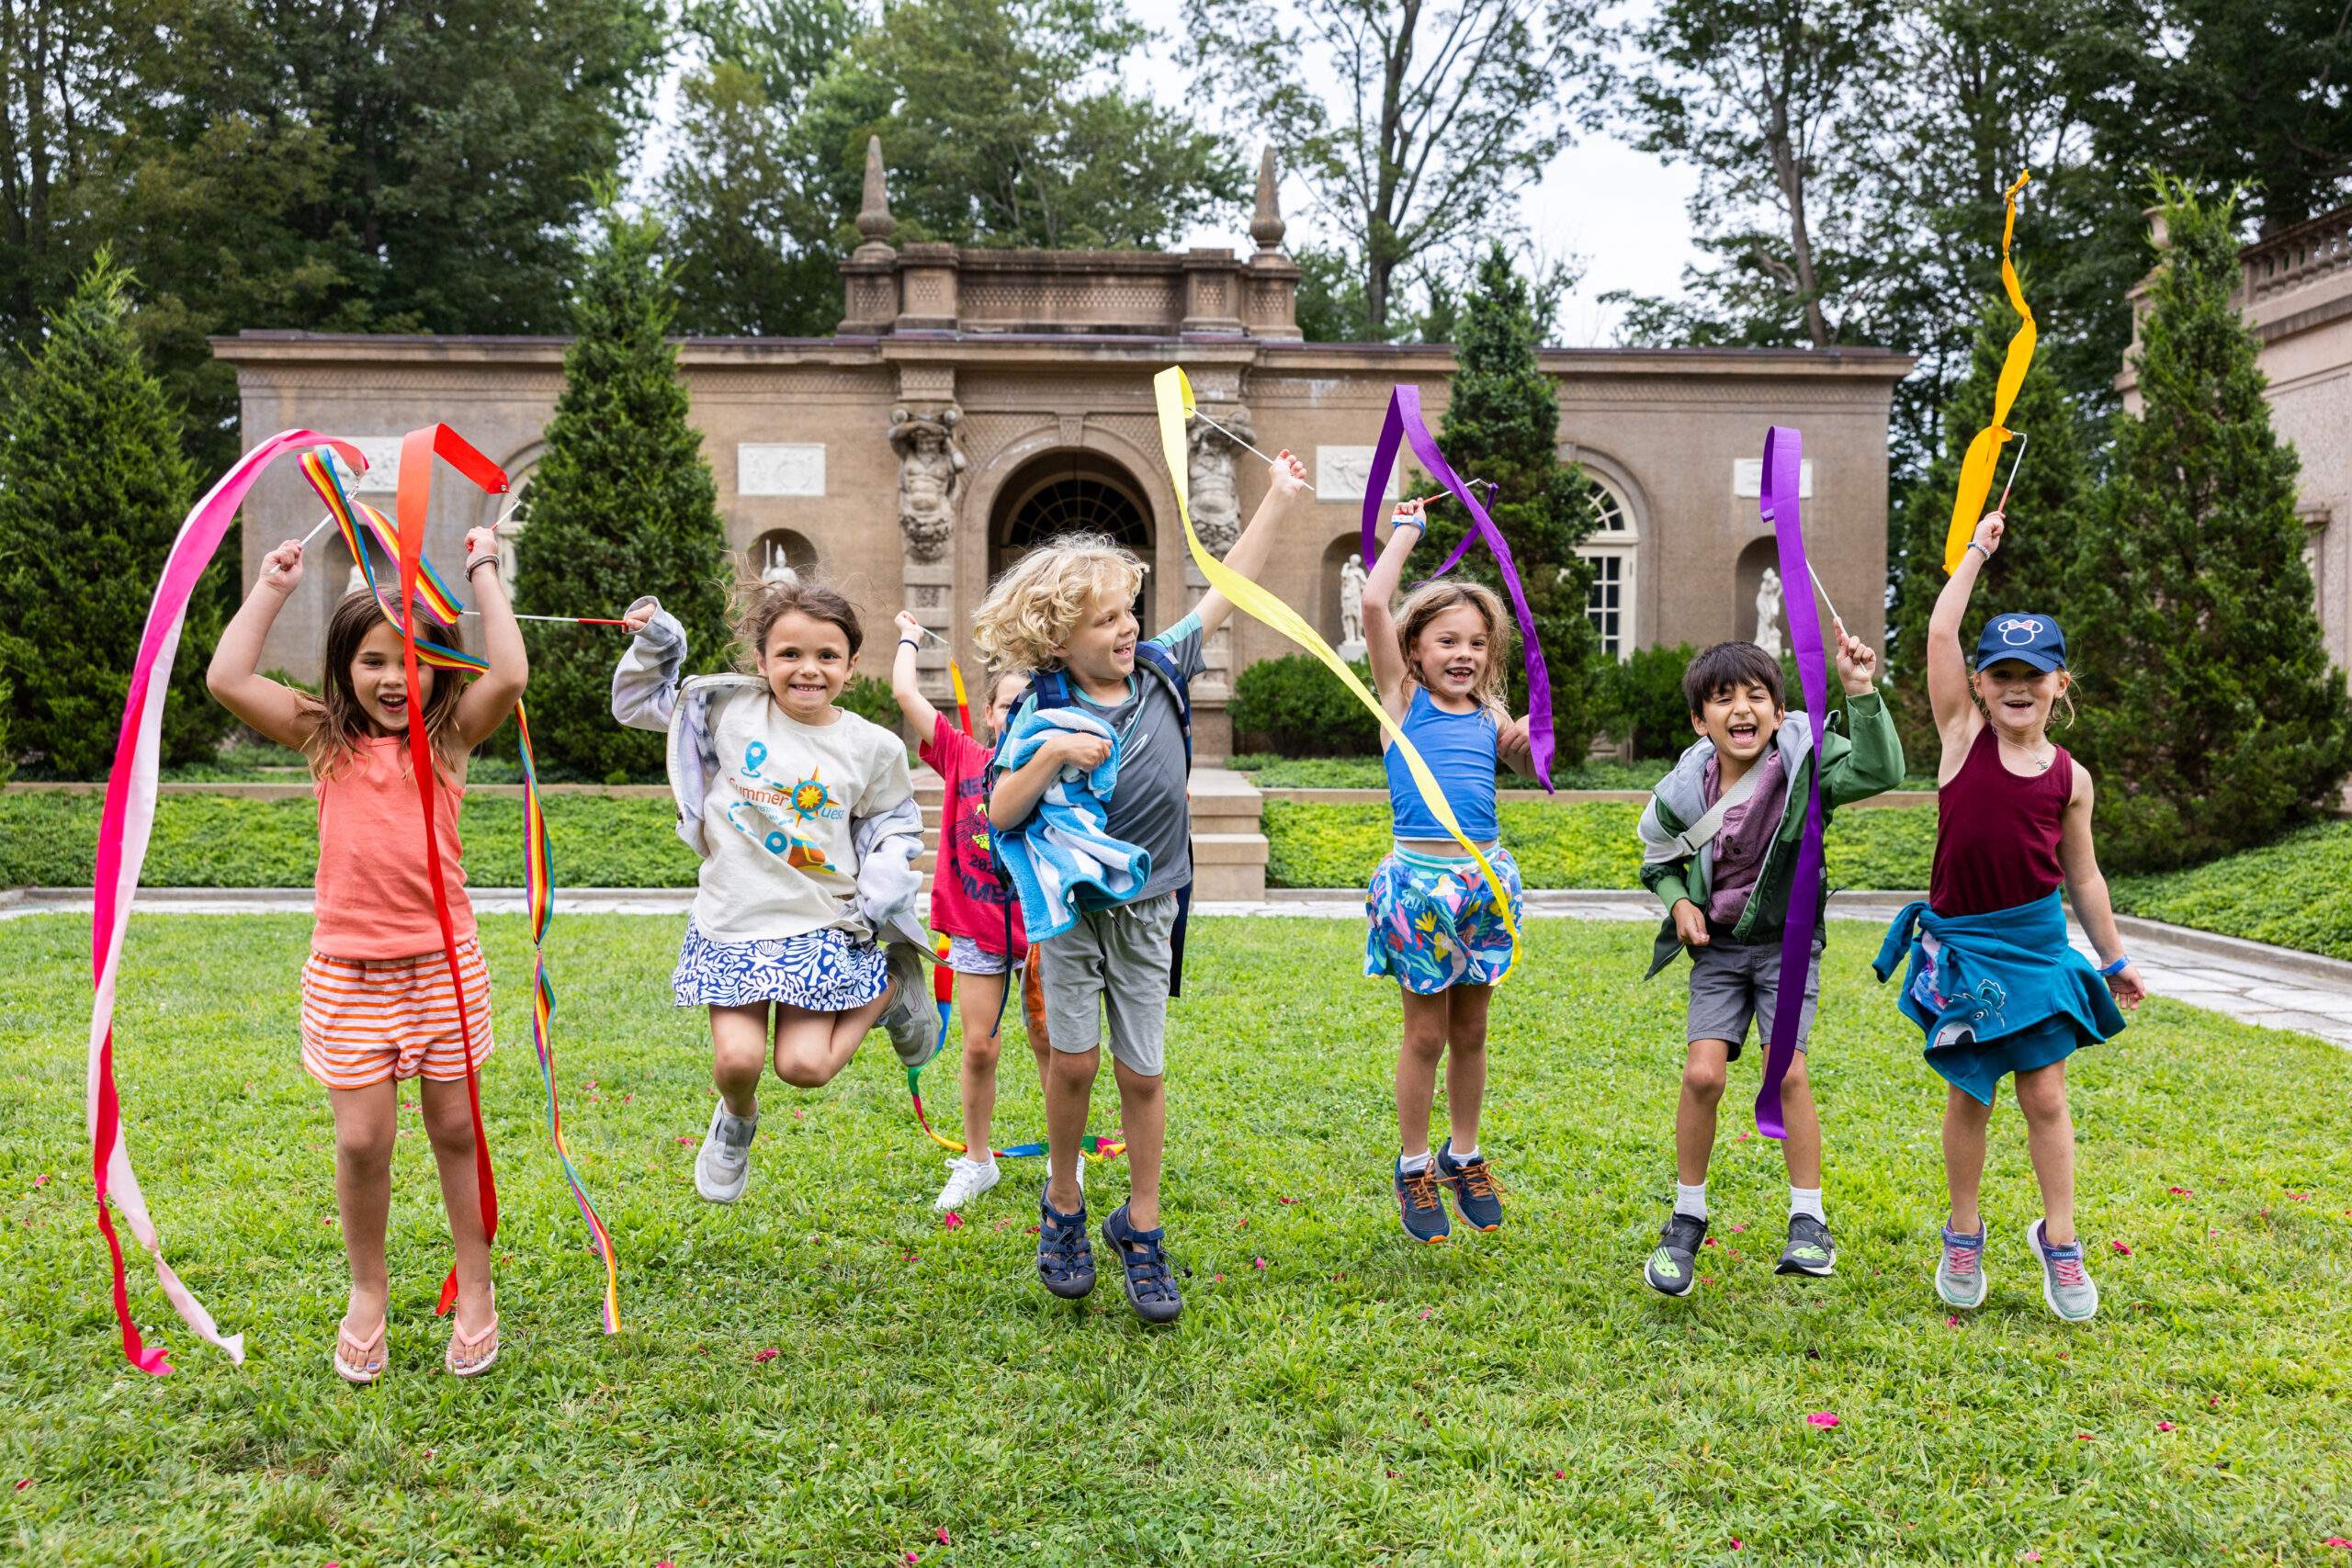 Campers playing with ribbons at the Crane Estate outdoors during Summerquest